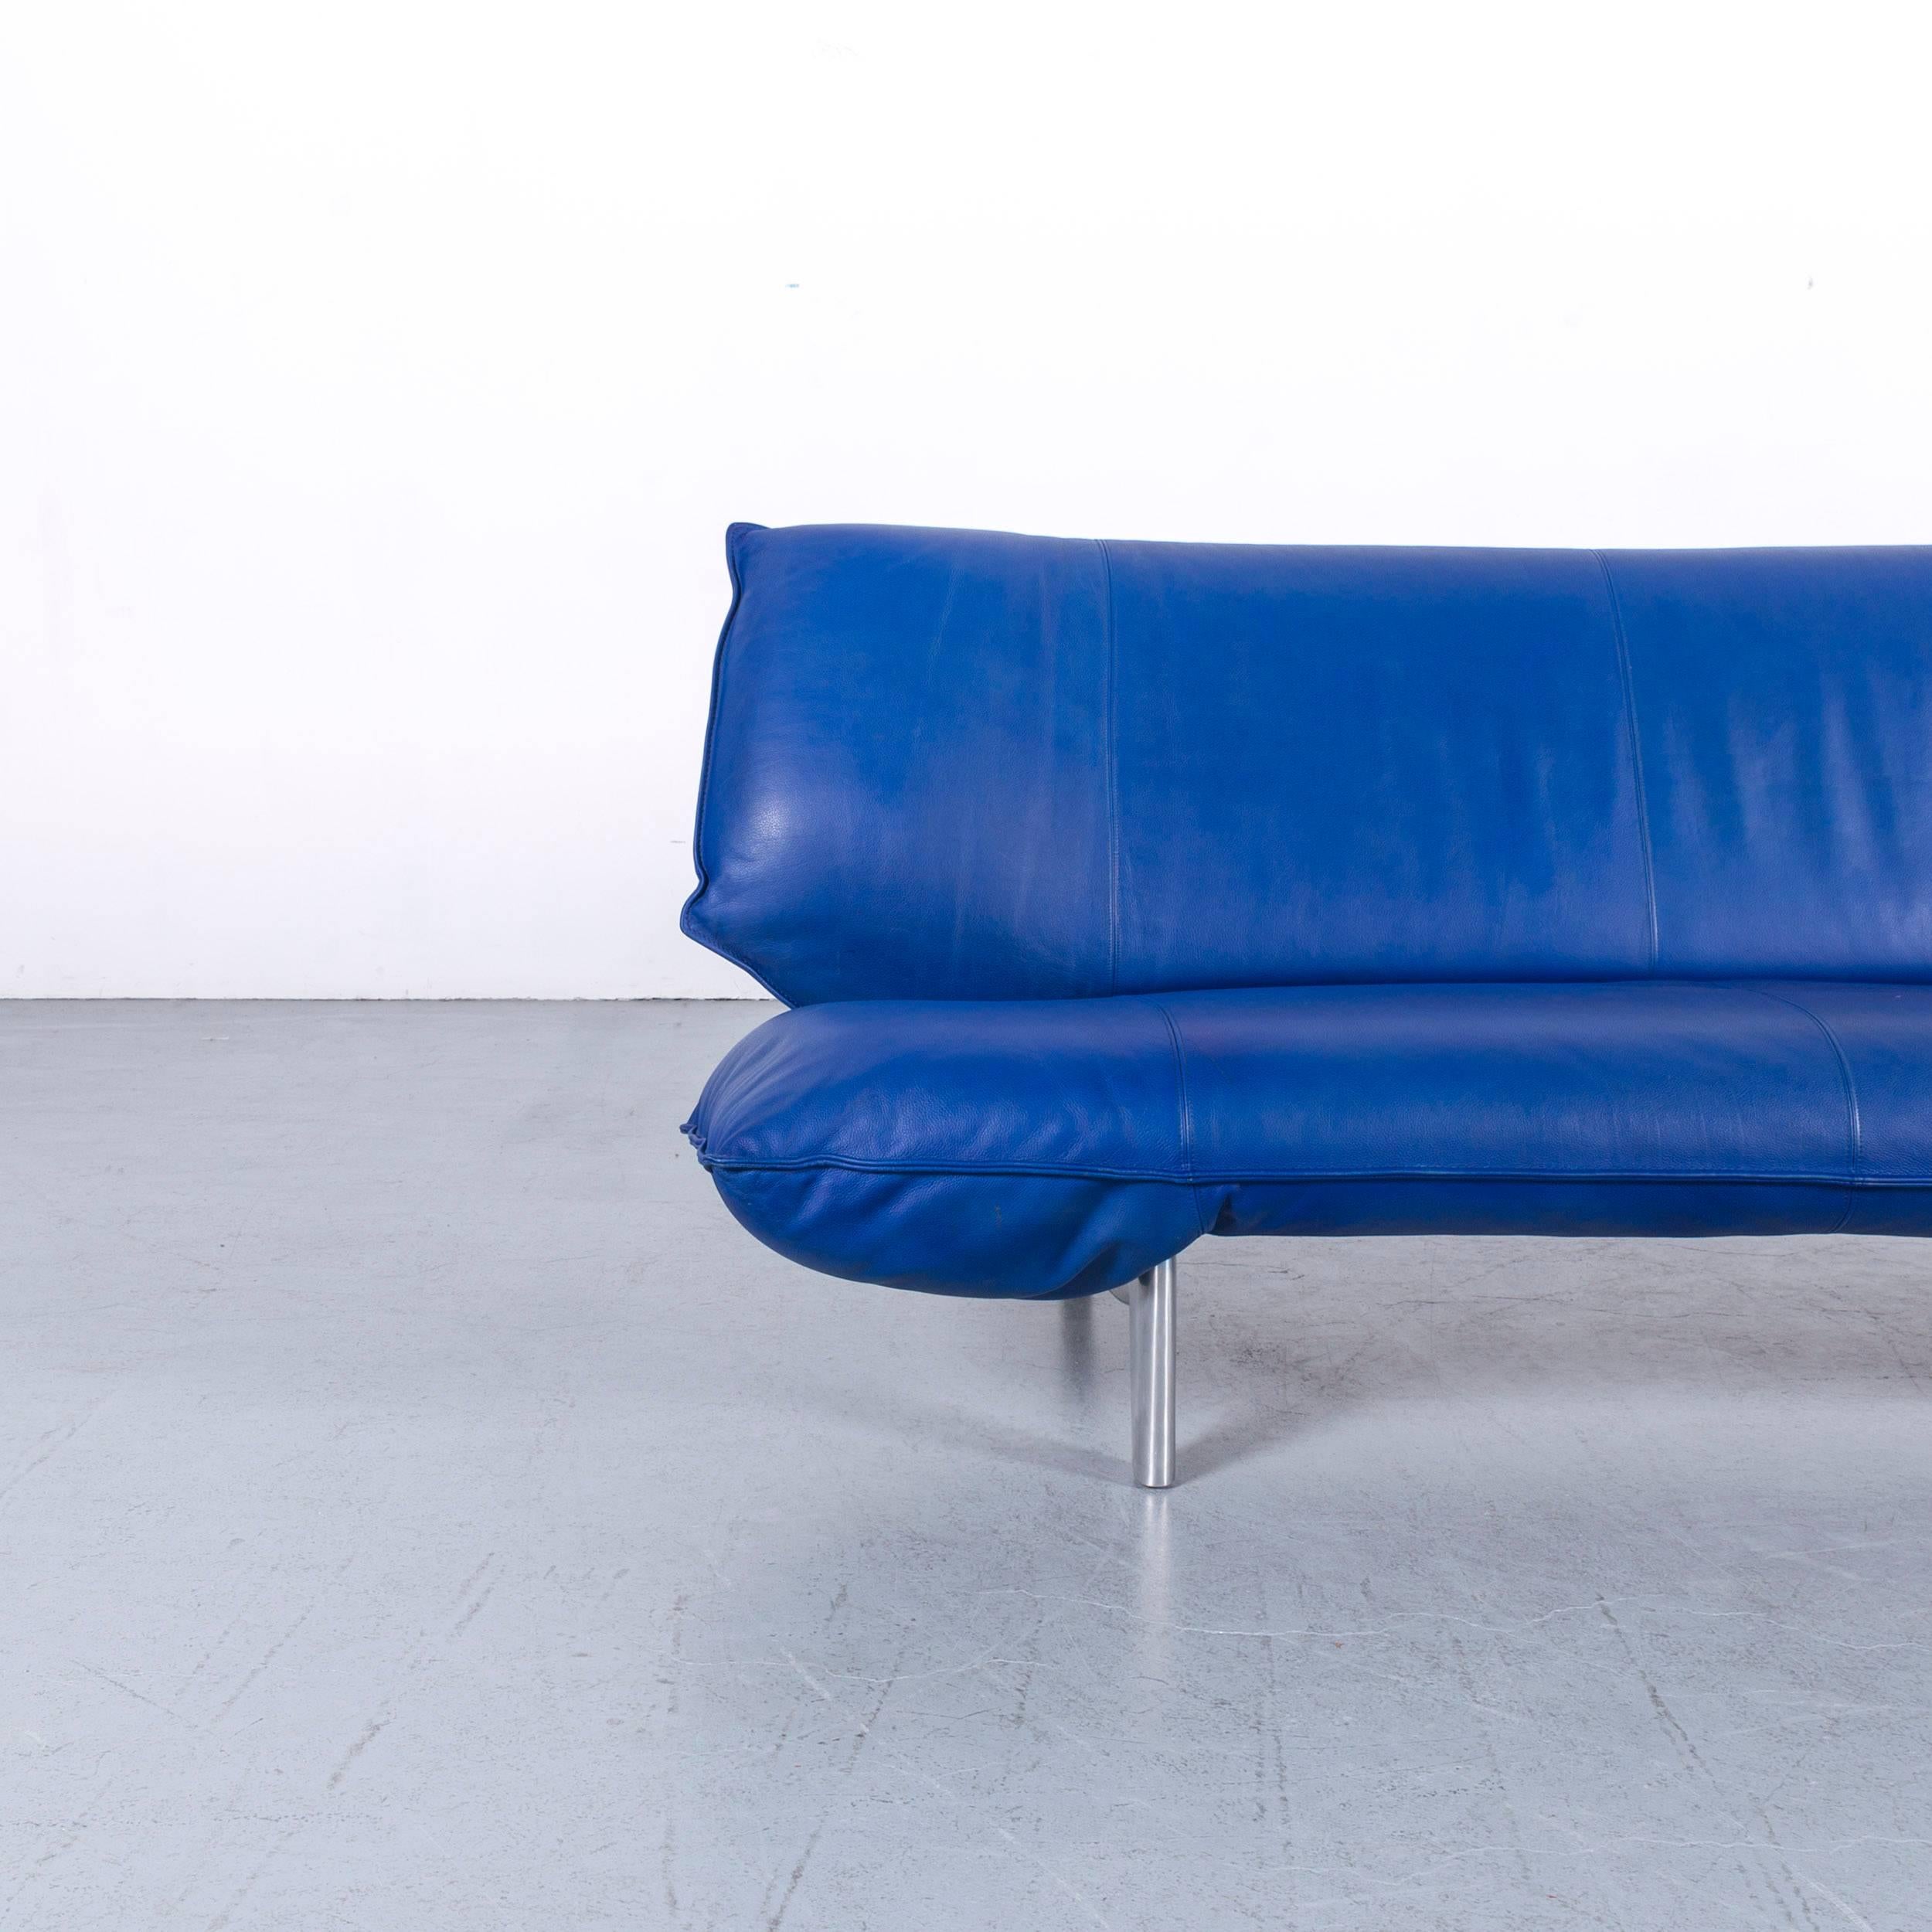 Leolux Tango Designer Sofa Leather Blue Two-Seat Couch Modern In Good Condition For Sale In Cologne, DE